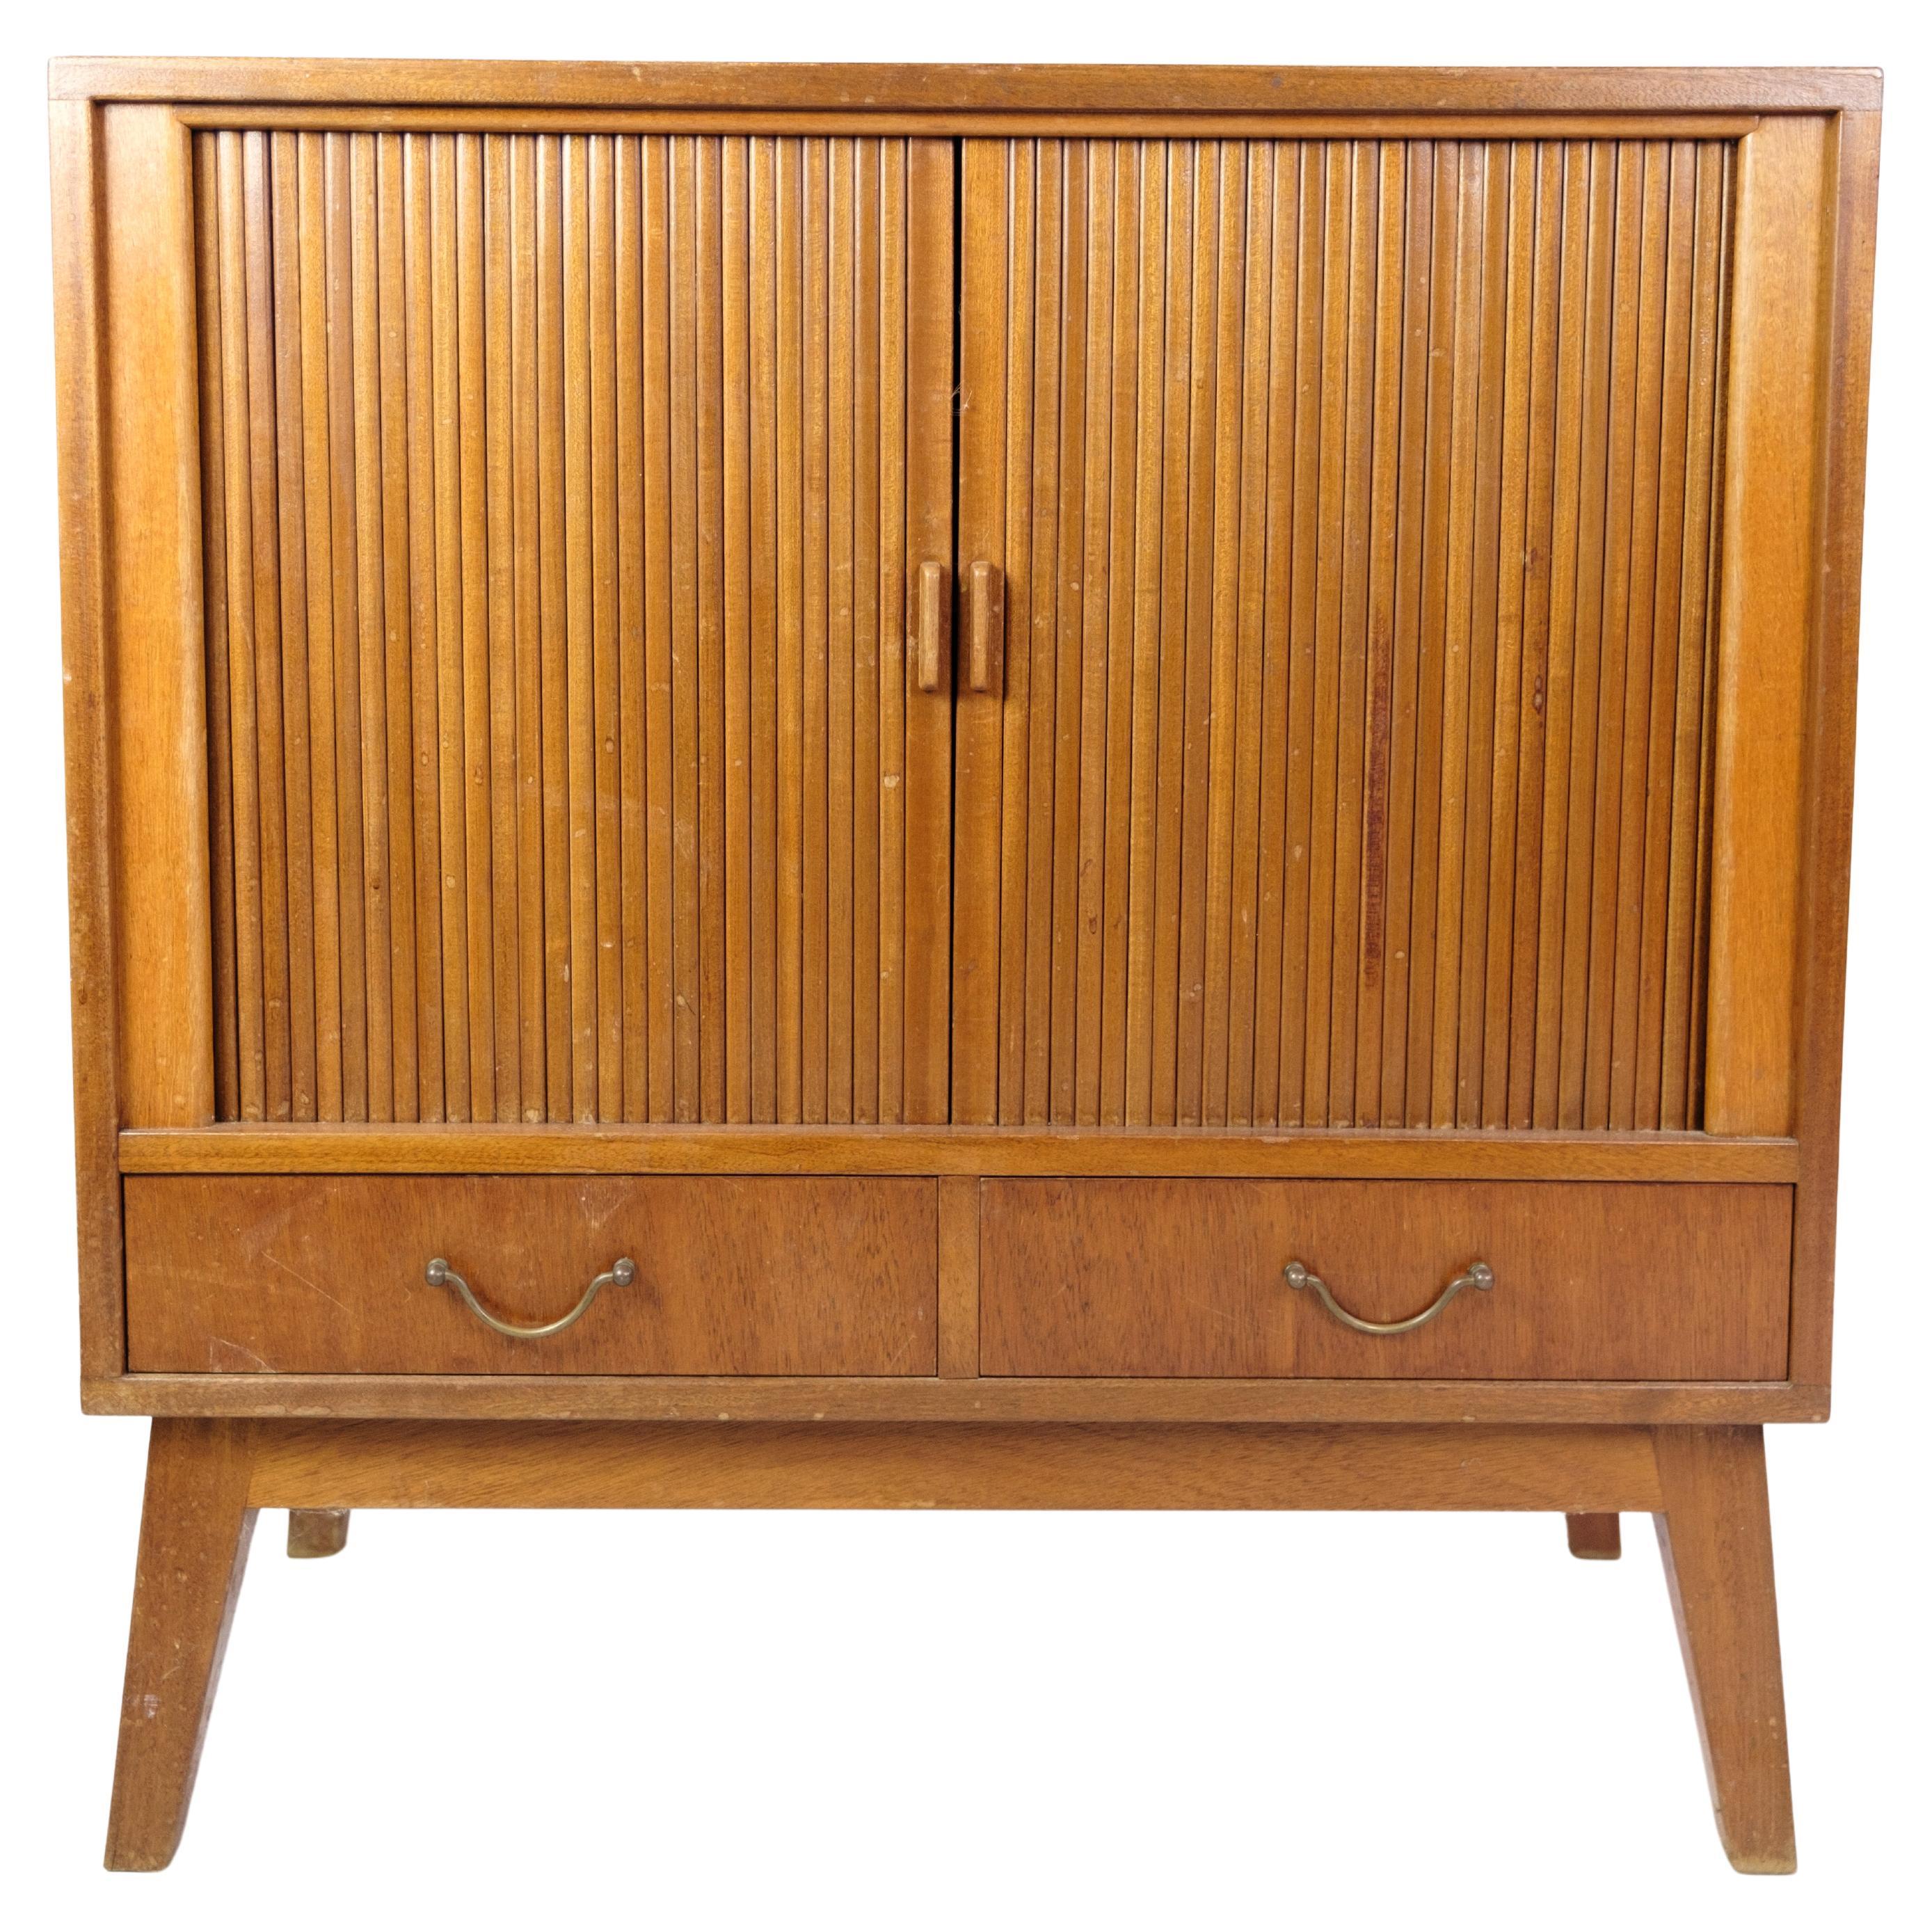 Chest Of Drawers Made In Teak, Danish Design From 1960s